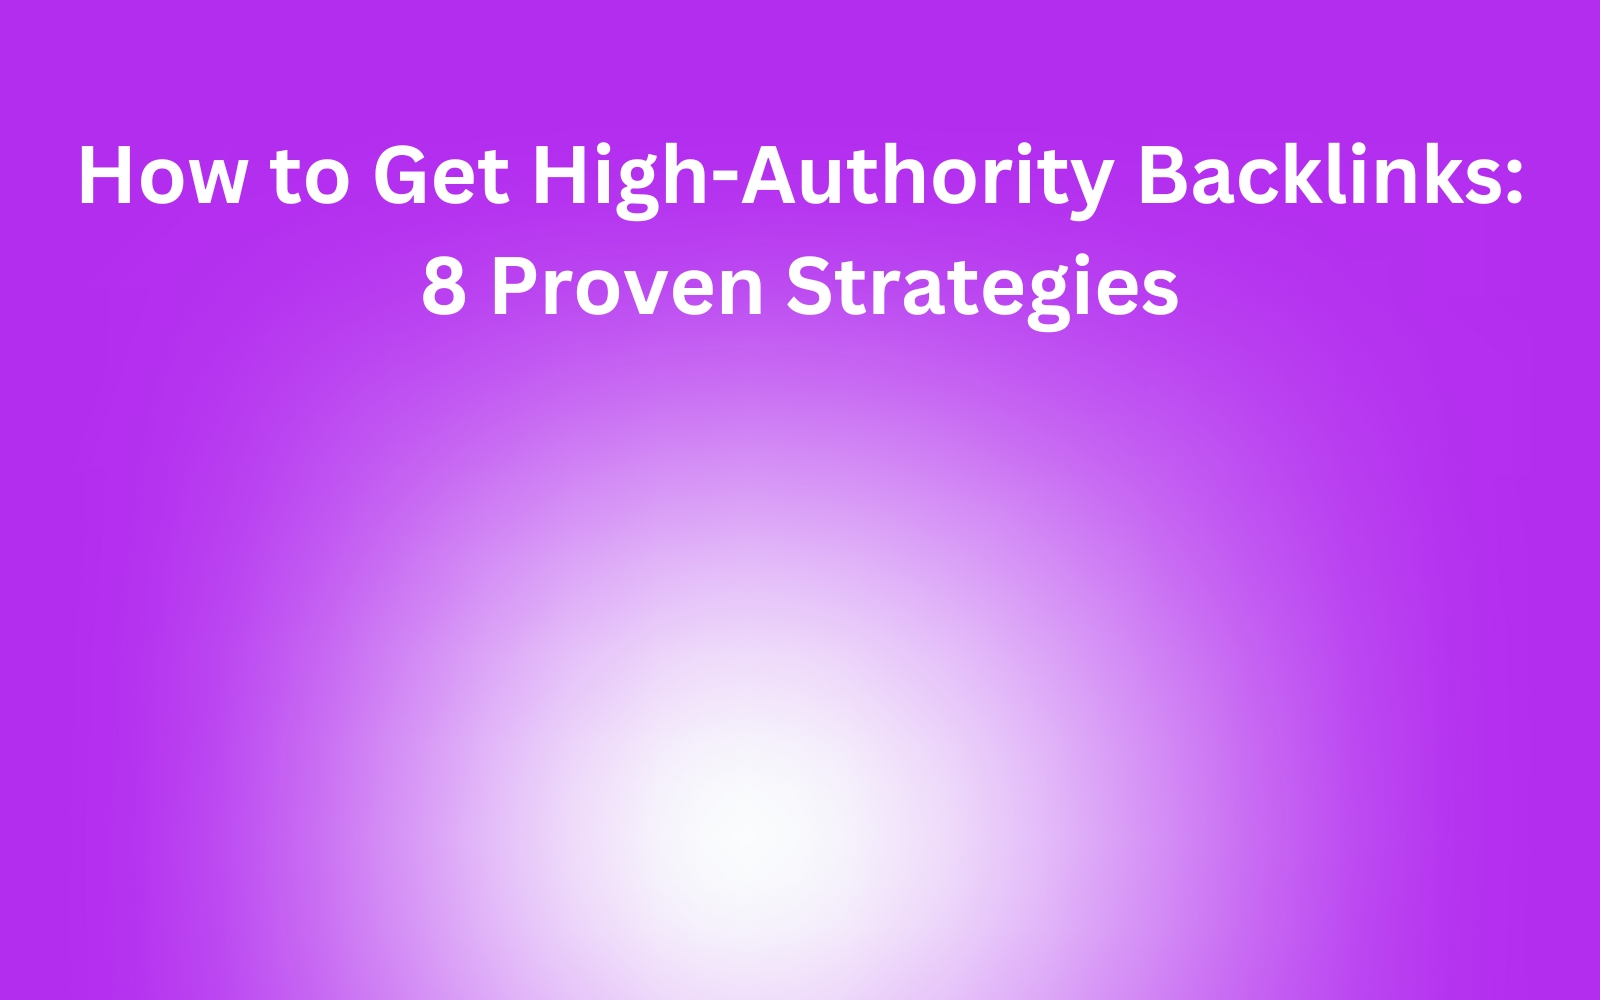 How to get high-authority links: 8-step strategy